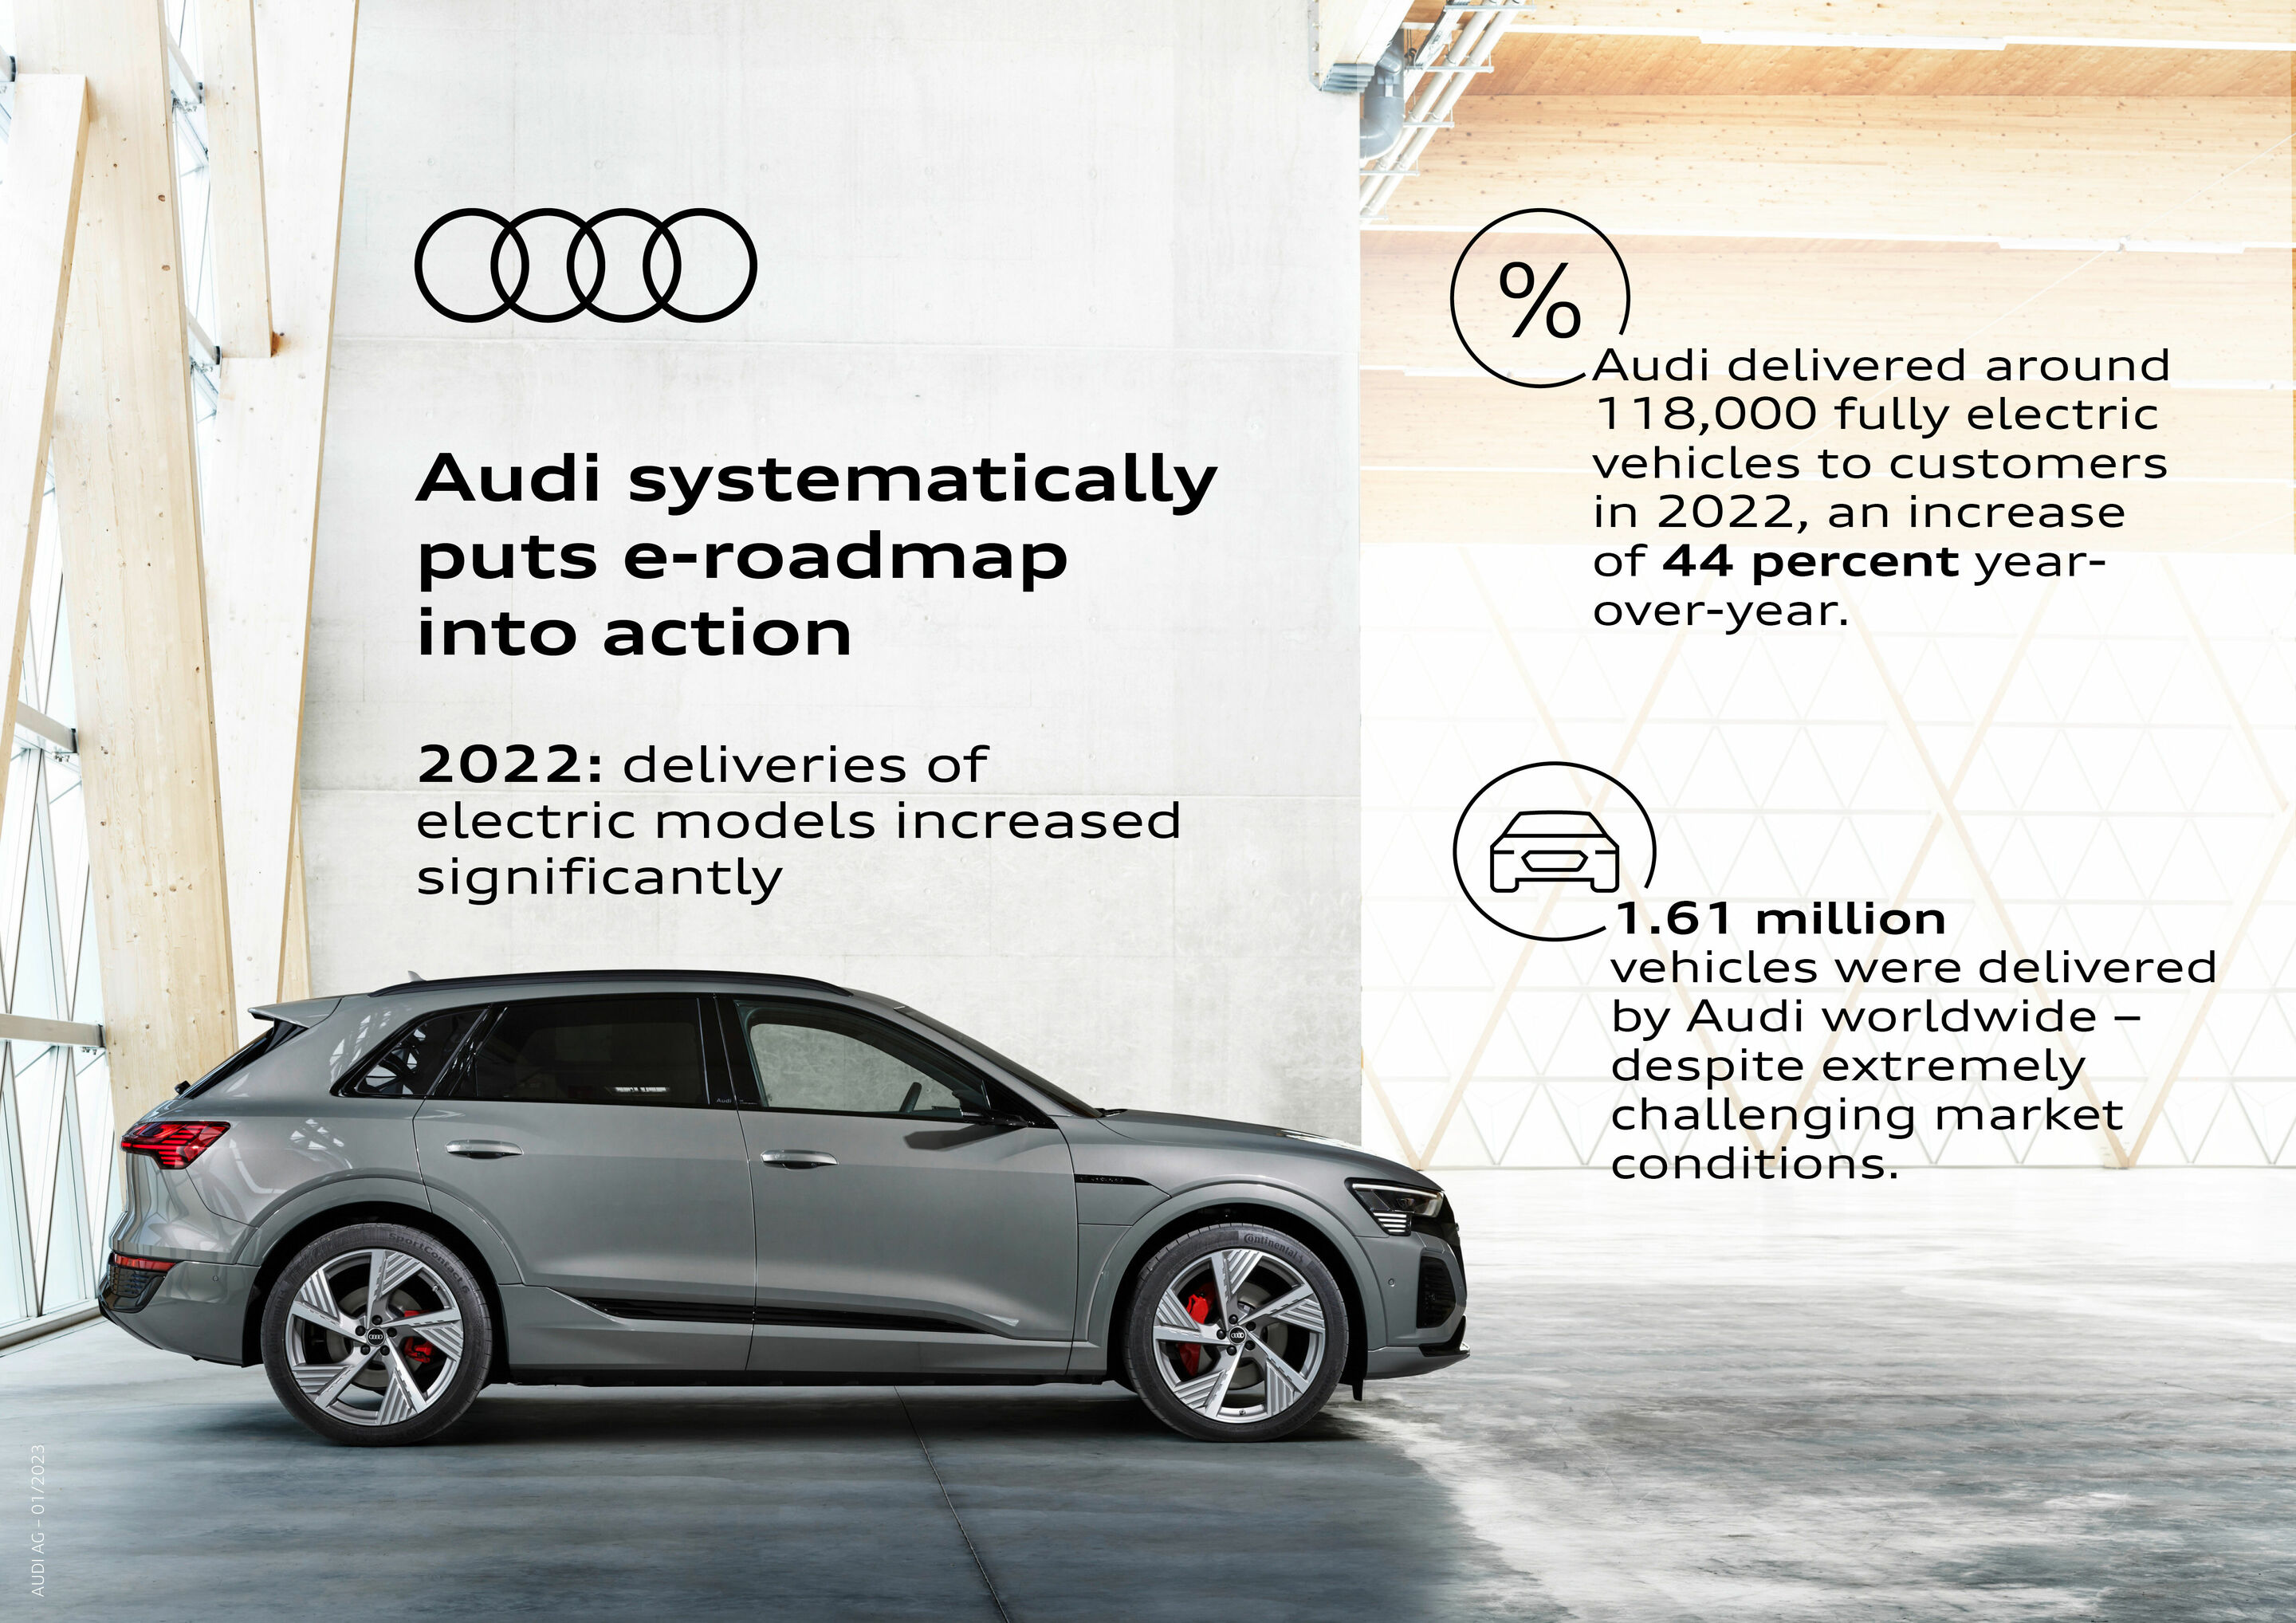 Software update: Audi offers new, high-value features for the Audi